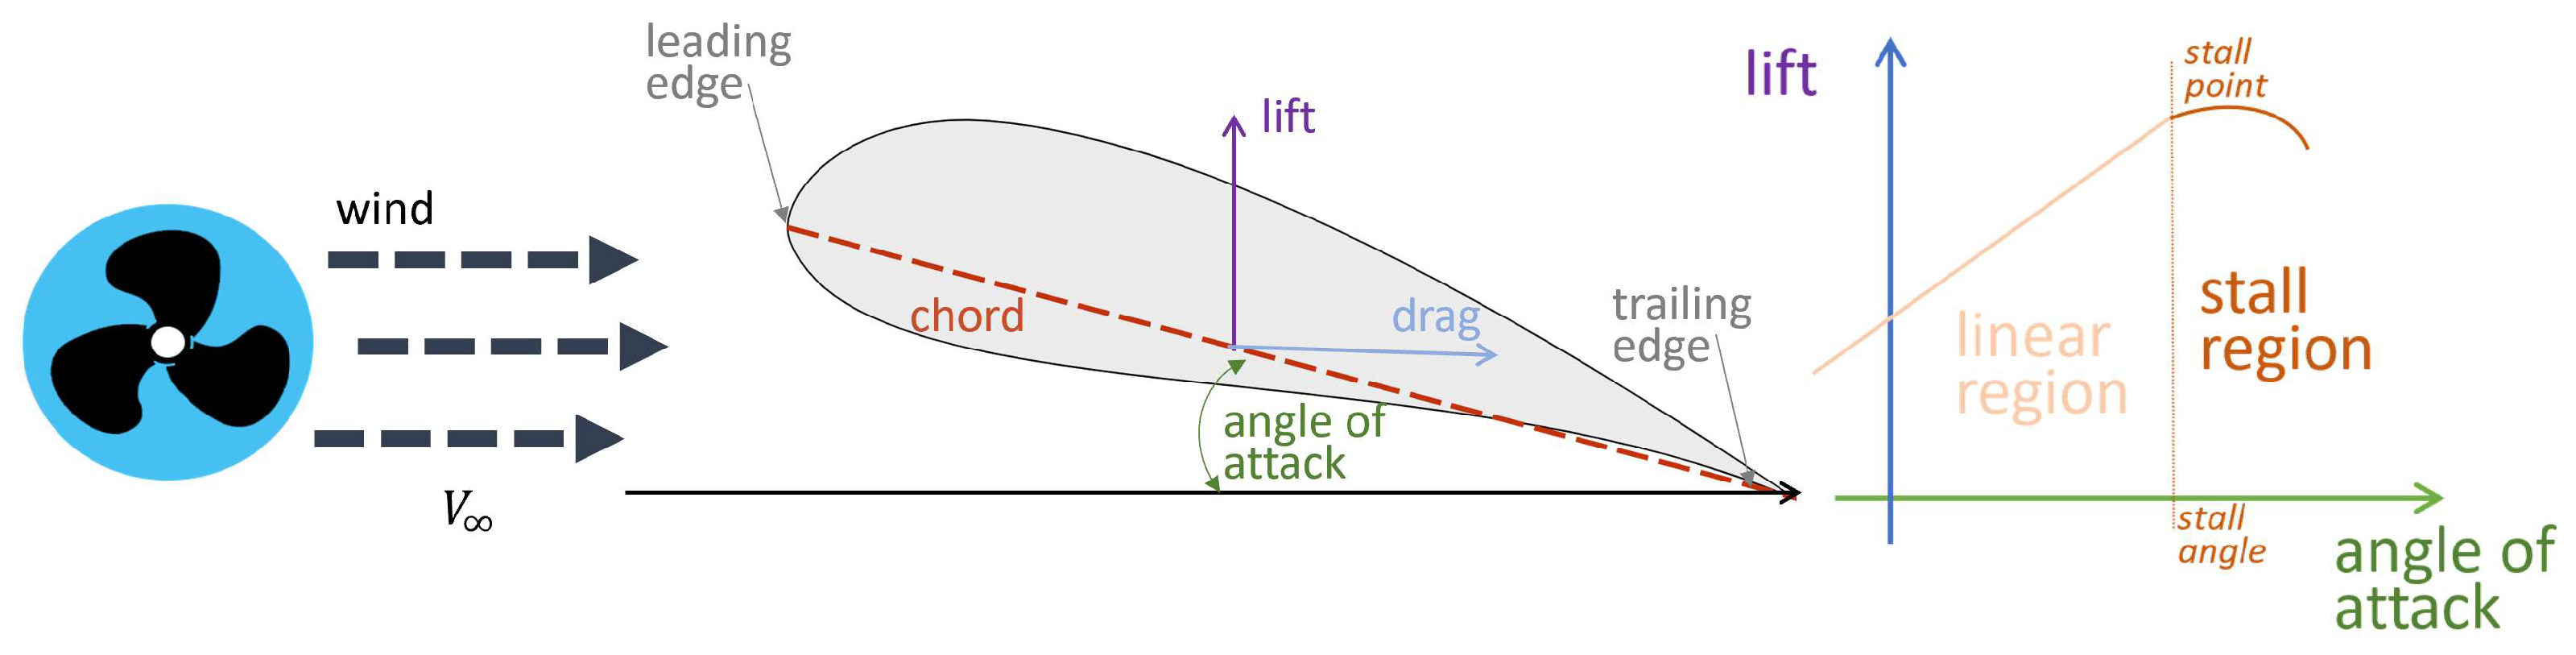 How much lift on an aeroplane is due to pressure from under the wing lifting  the wing and how much lift is due to aerodynamic “suction” on the top of  the wing? 